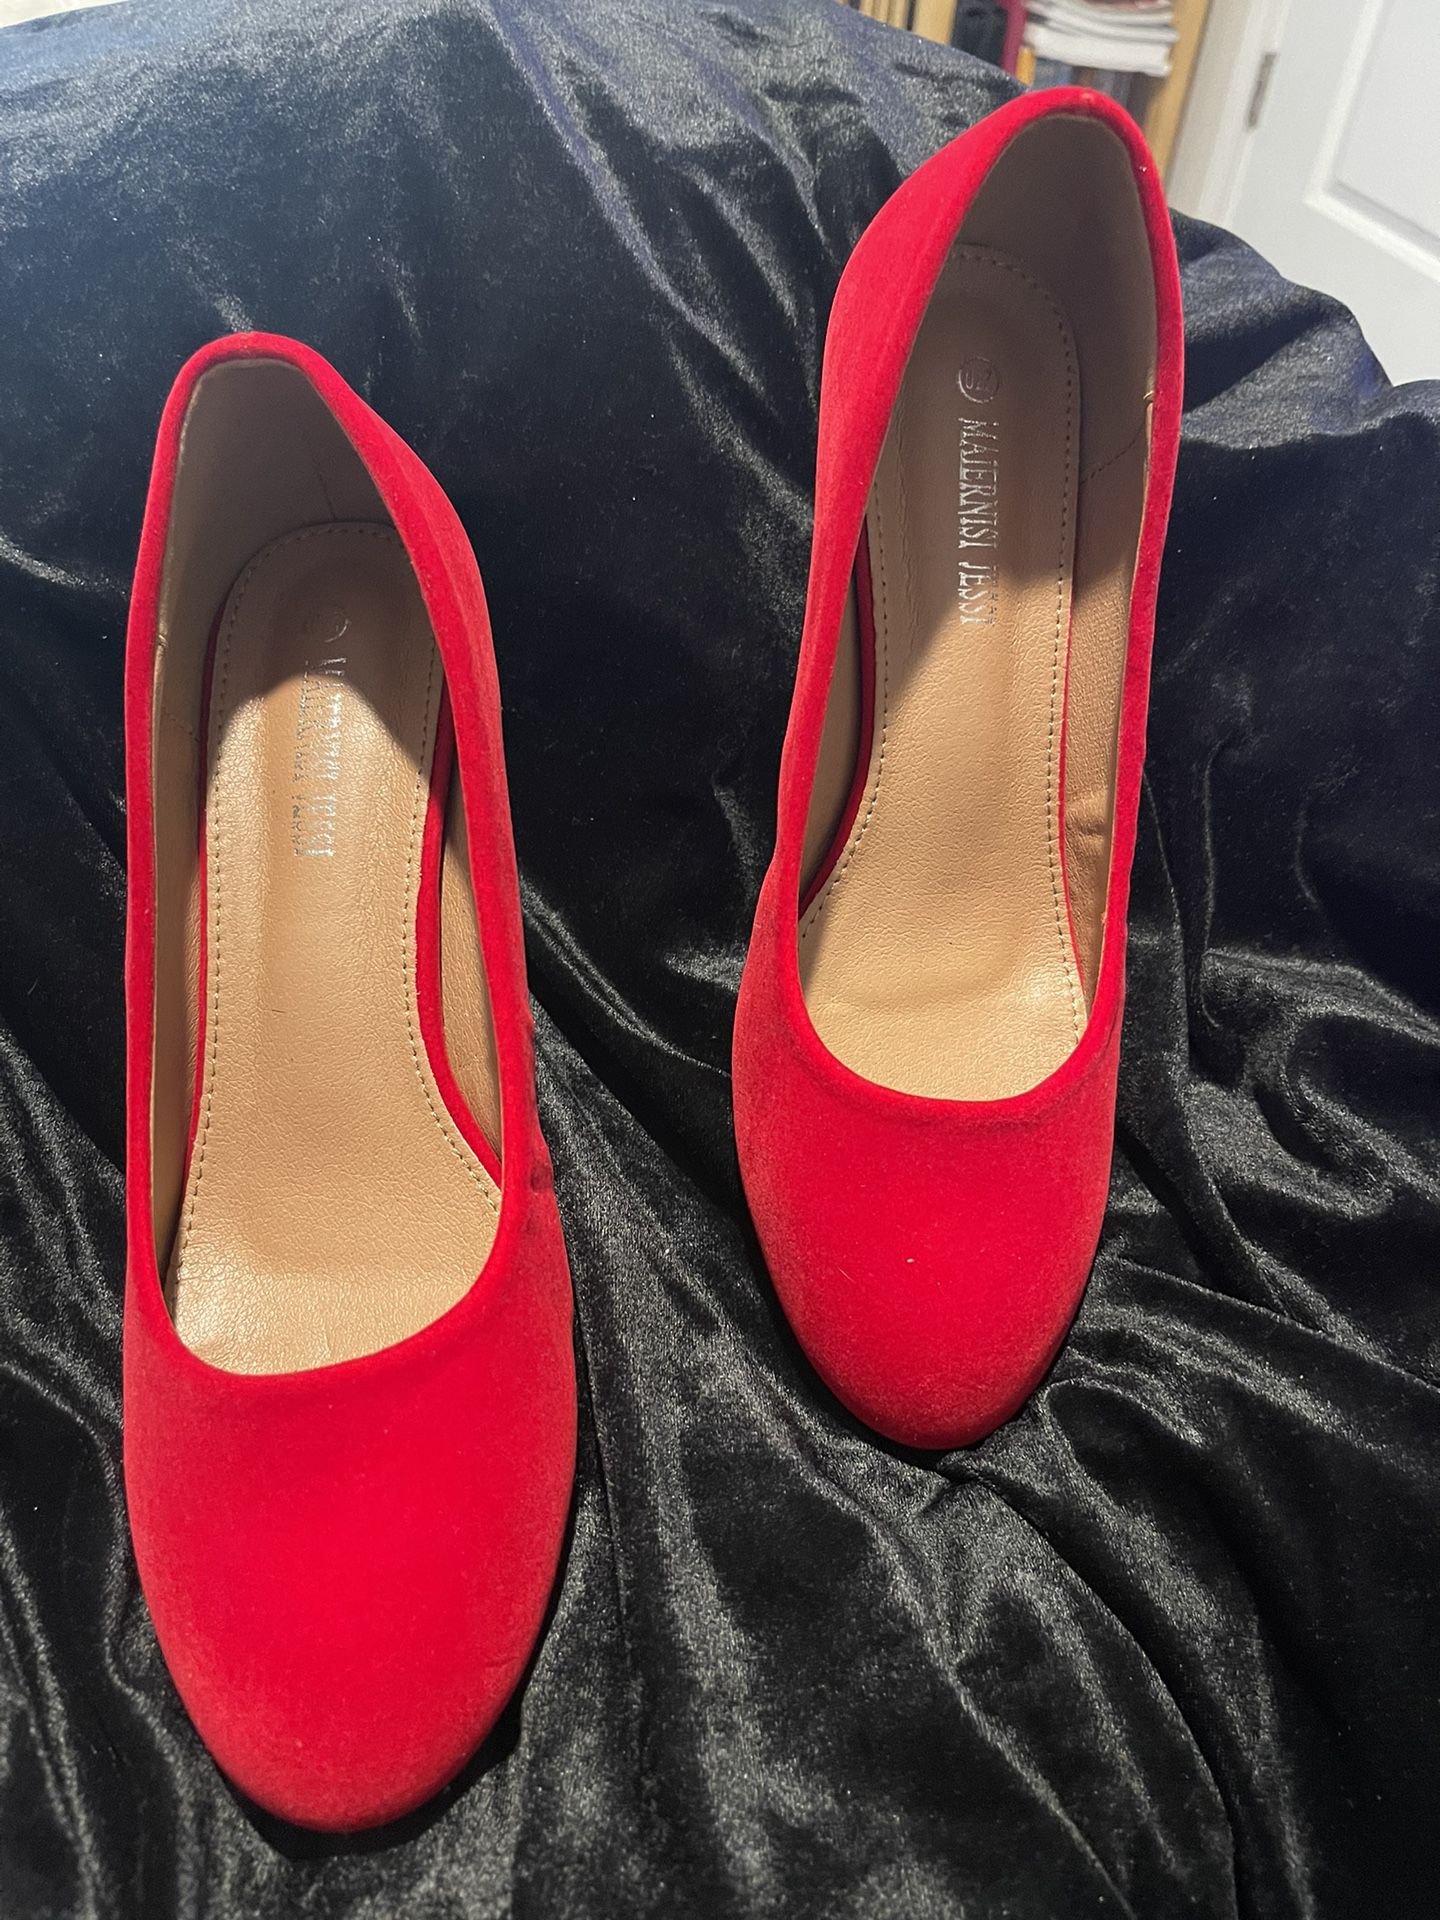 NWOT Maiernisi Jessi Size 9 Red suede Pumps